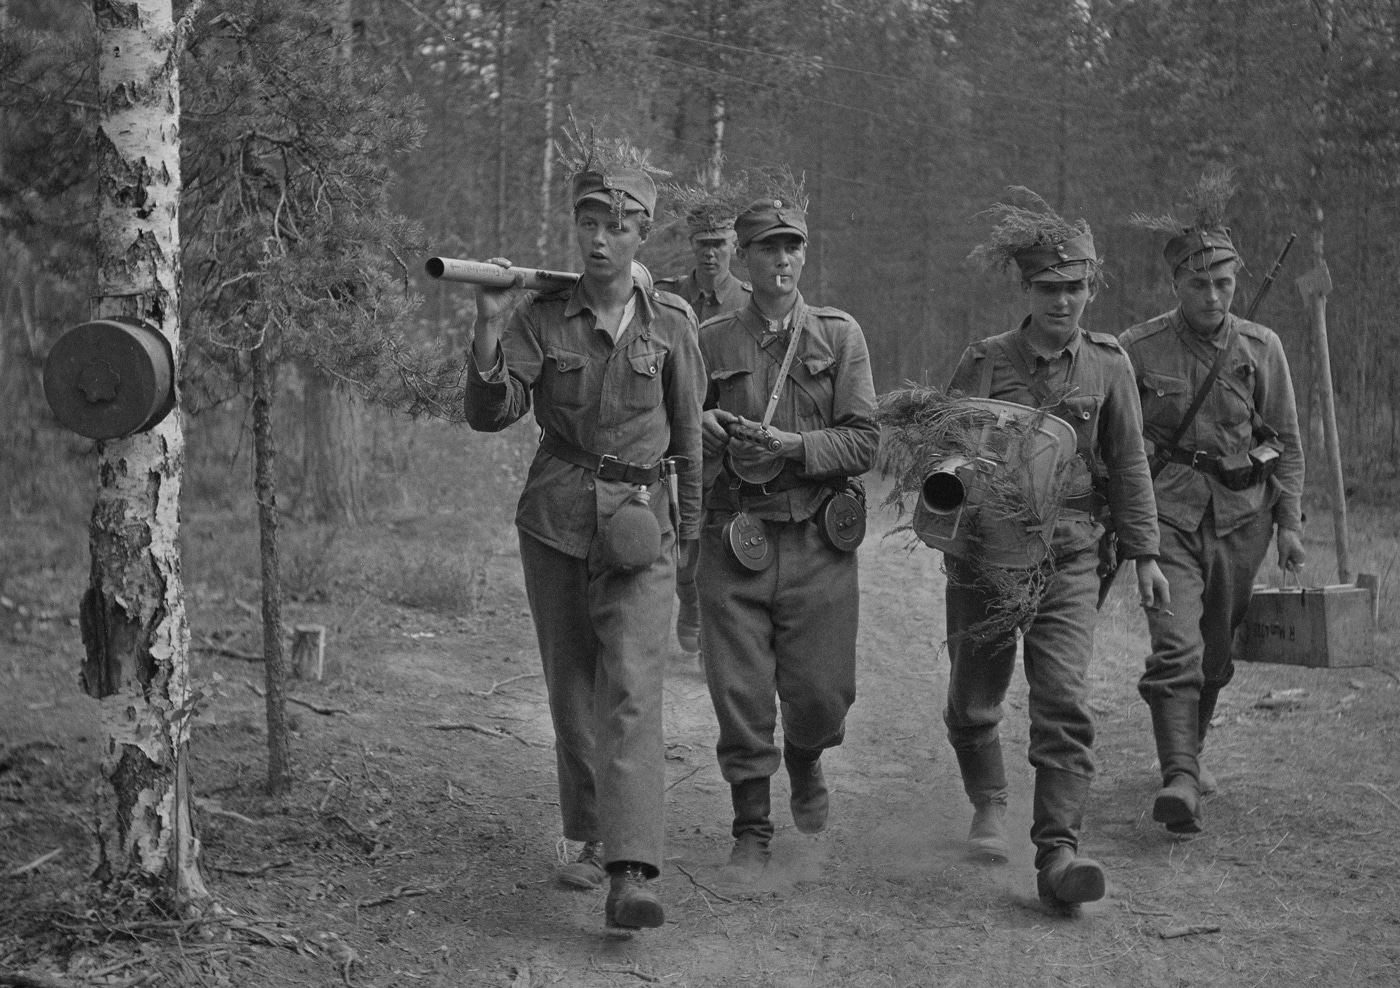 panzerfaust and panzershreck carried by finnish troops